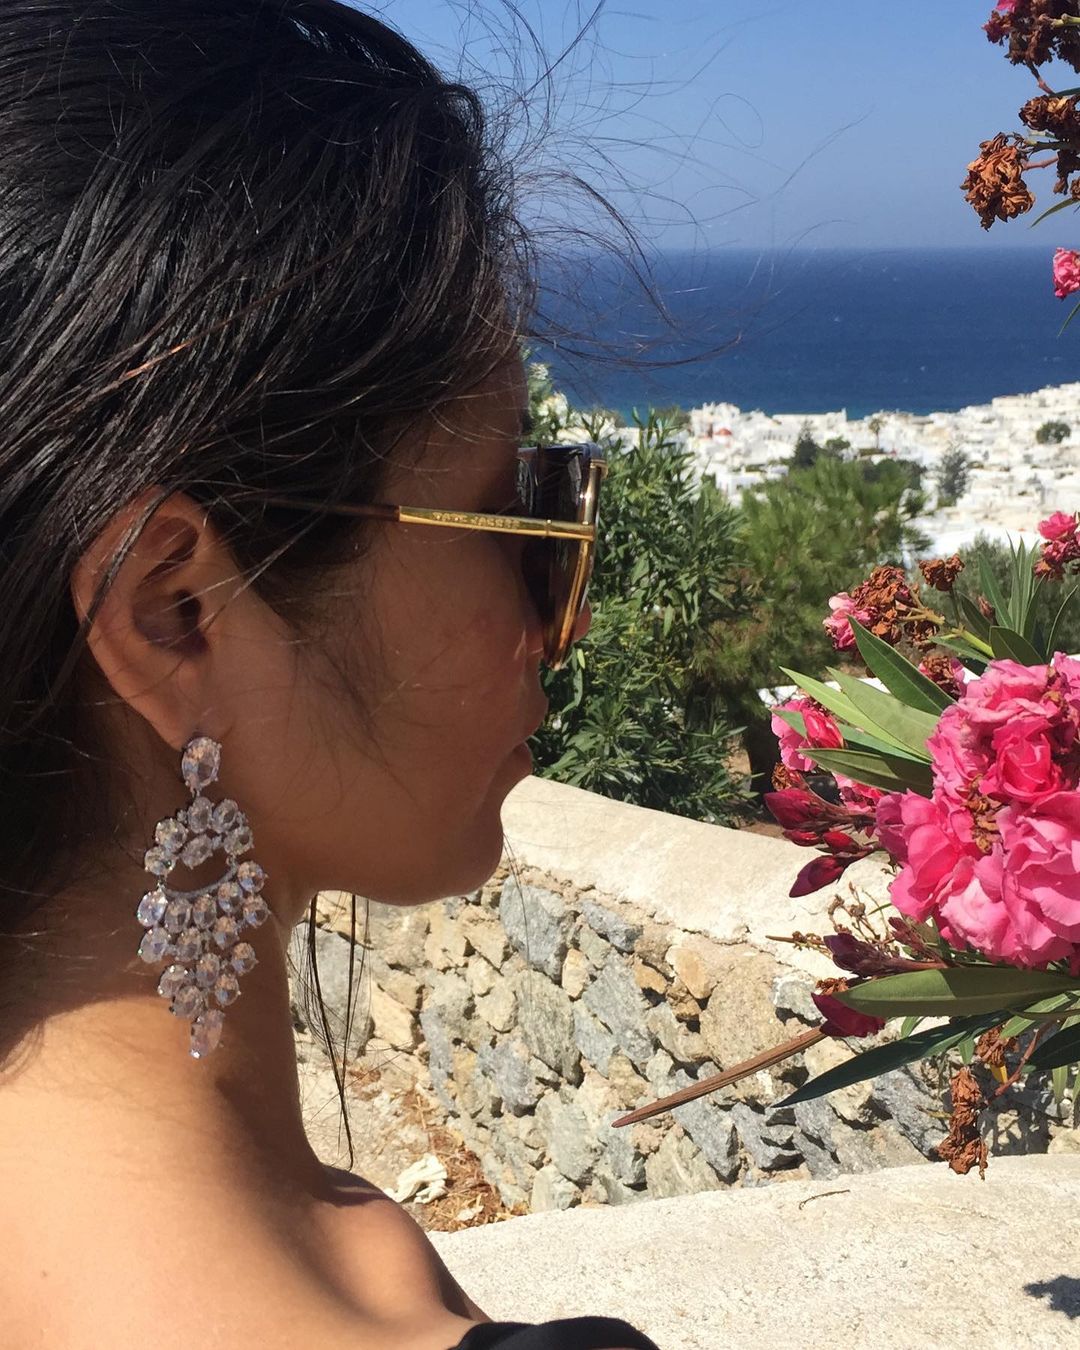 The Greek Island of Mykonos: How It Has Influenced Fashion Trends Around the World